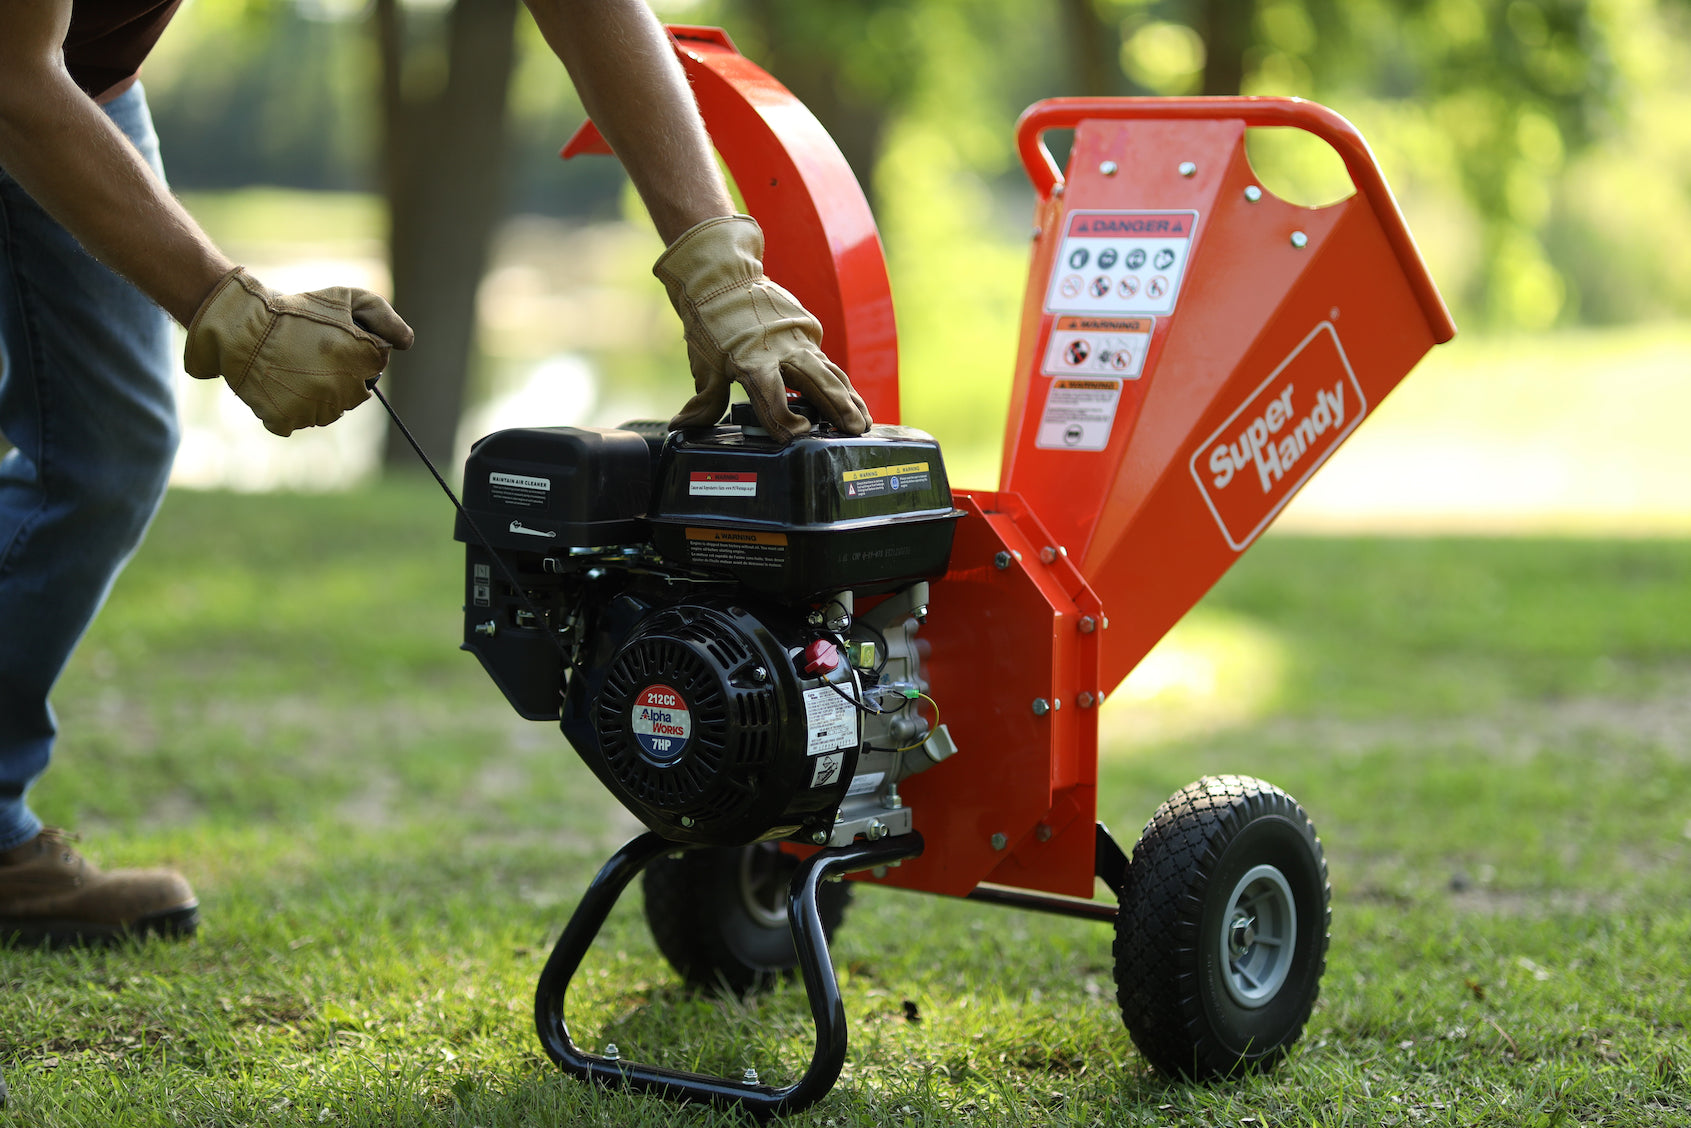 The Ultimate Guide to Maintaining Your Garden Chipper for Longevity